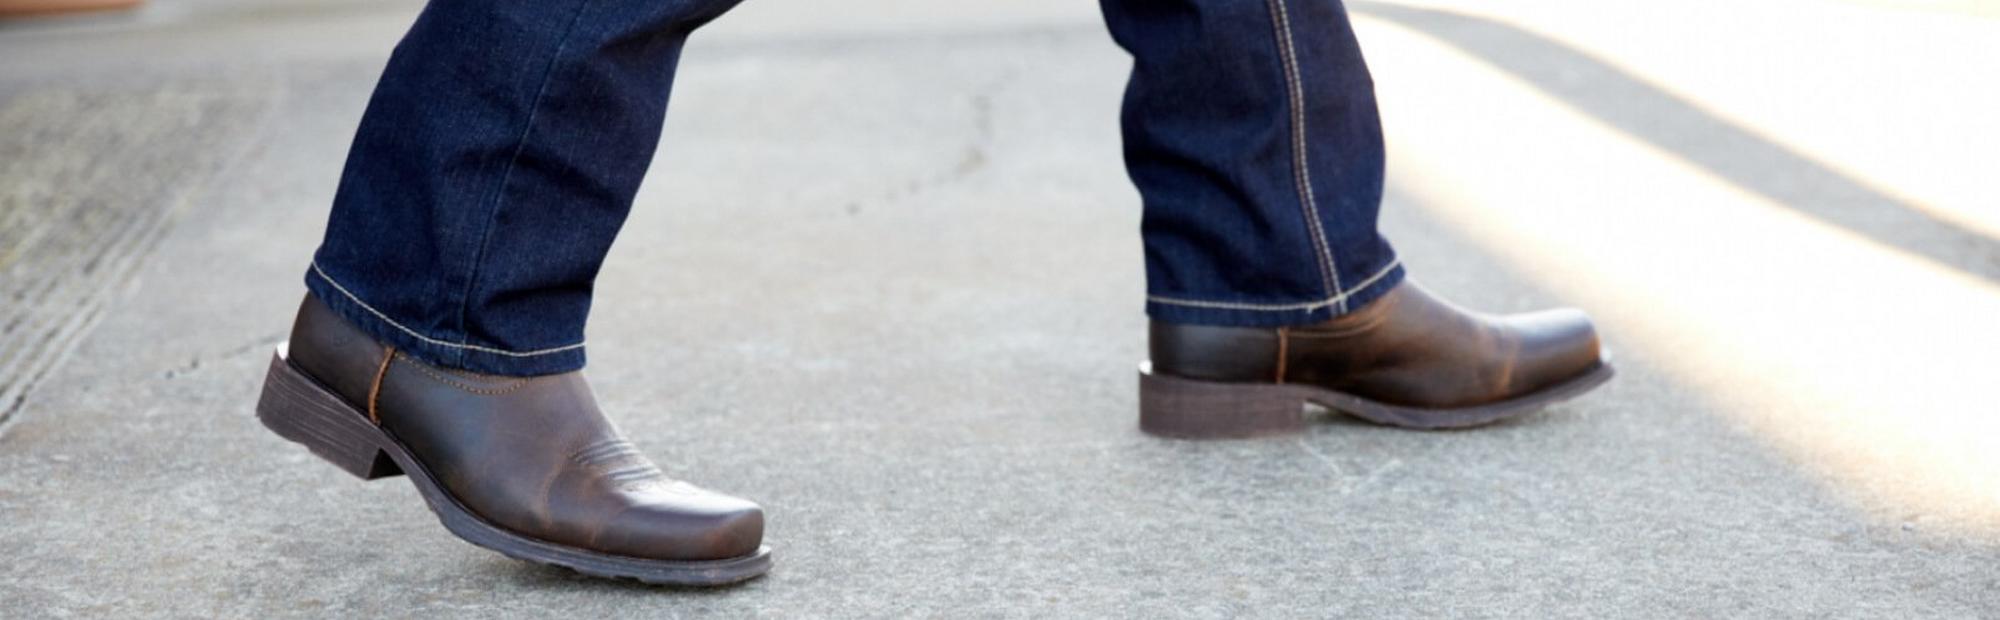 Why do guys wear cowboy boots outside of their jeans? It looks so